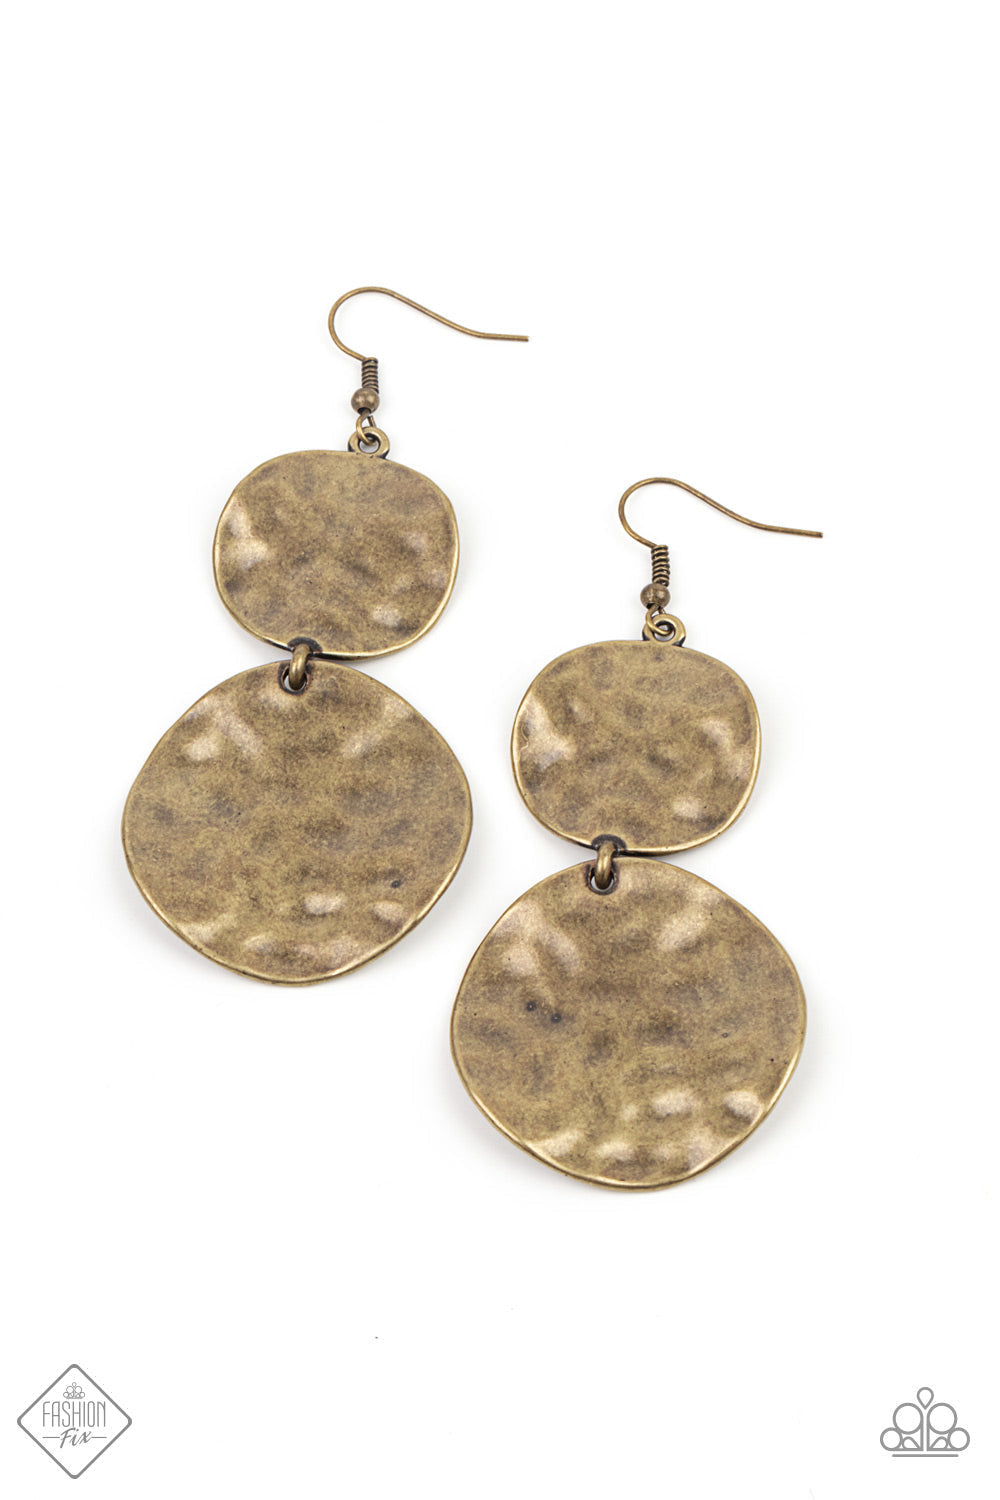 HARDWARE-Headed - Brass Earrings - Paparazzi Accessories - Hammered in rippling waves, a pair of textured brass discs link into a dramatic lure with industrial edgy fashion earrings. Trendy fashion jewelry for everyone.